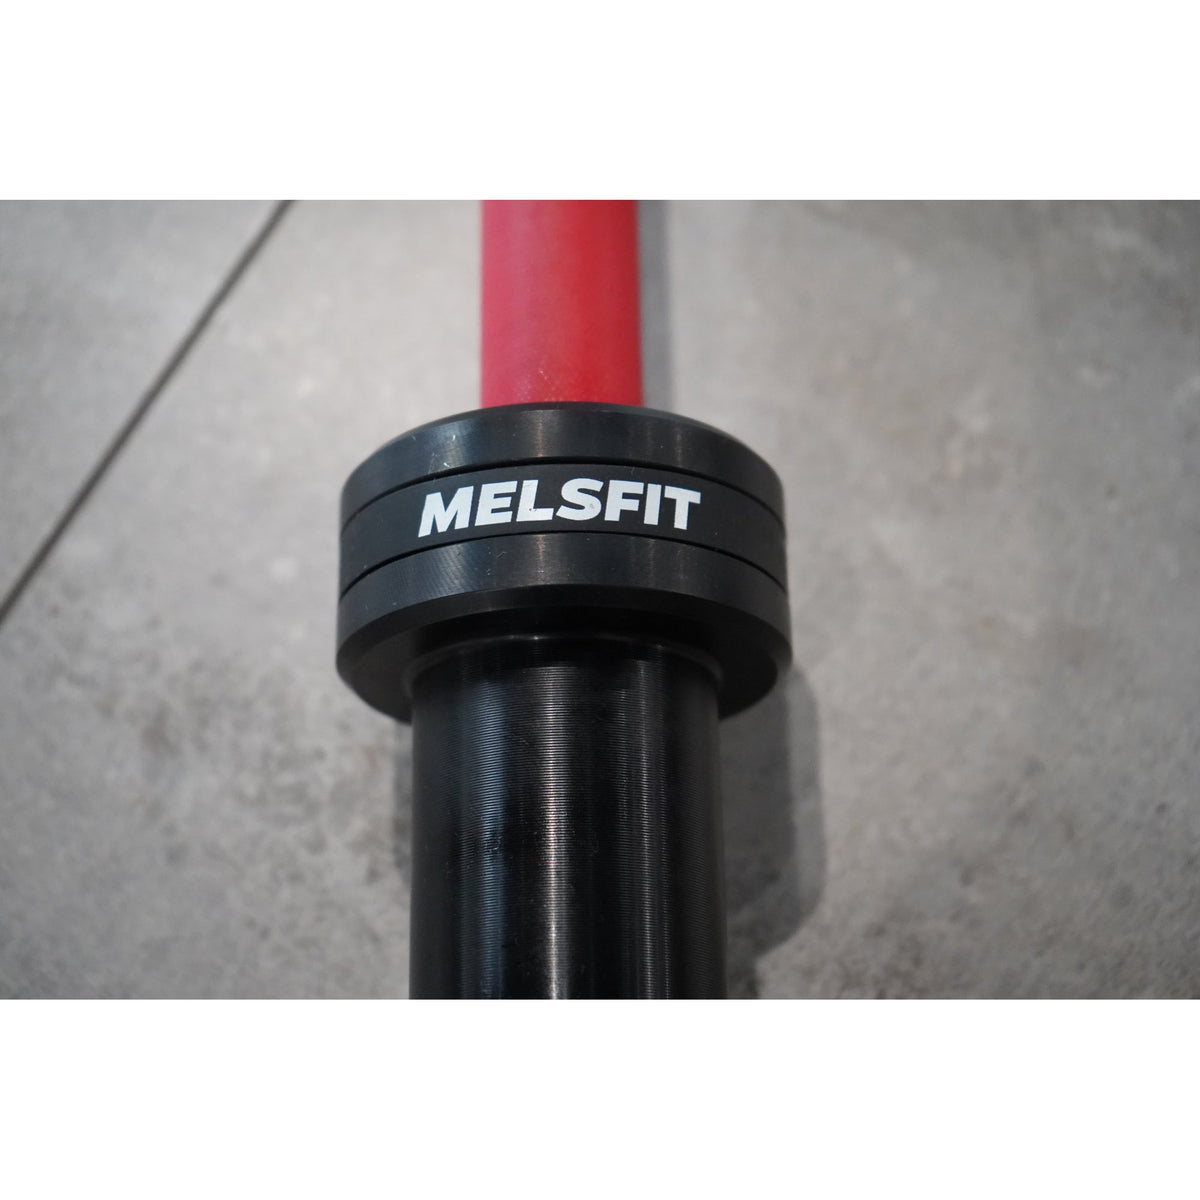 Cerakote Olympic Barbell - Melsfit performance